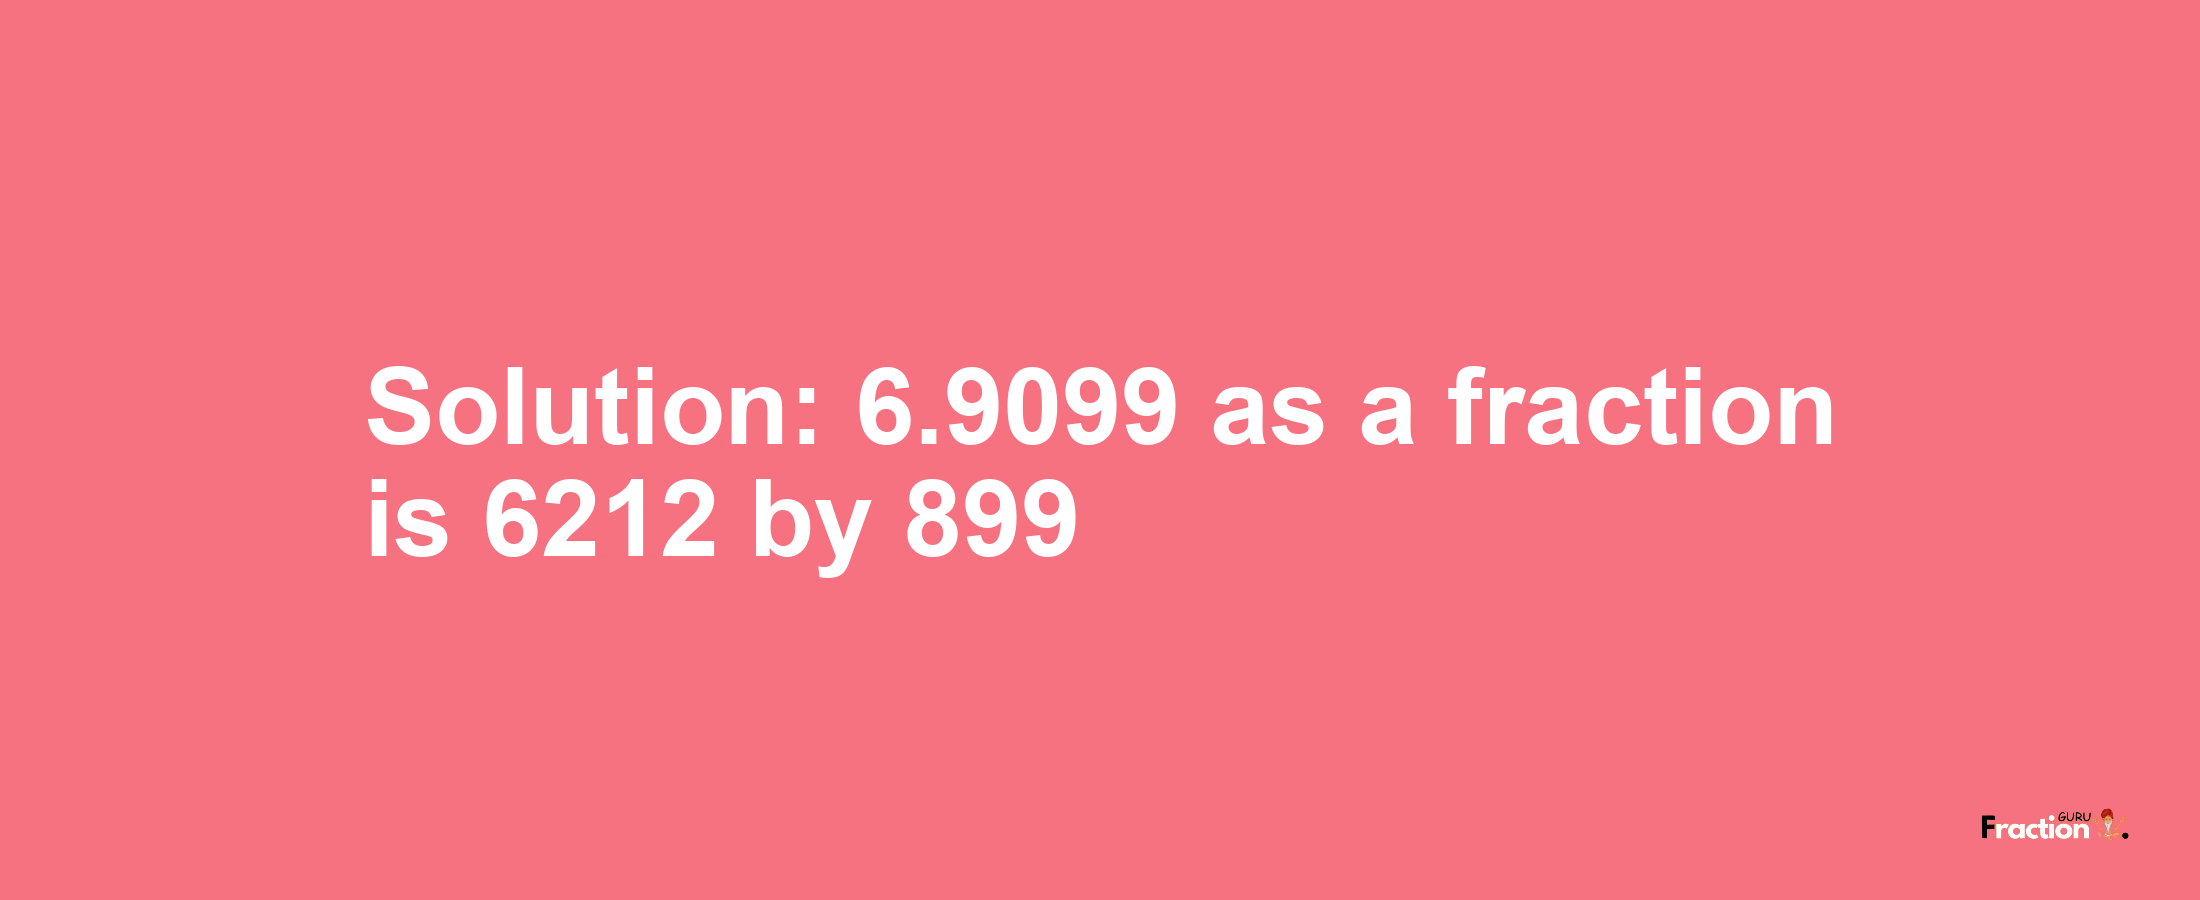 Solution:6.9099 as a fraction is 6212/899